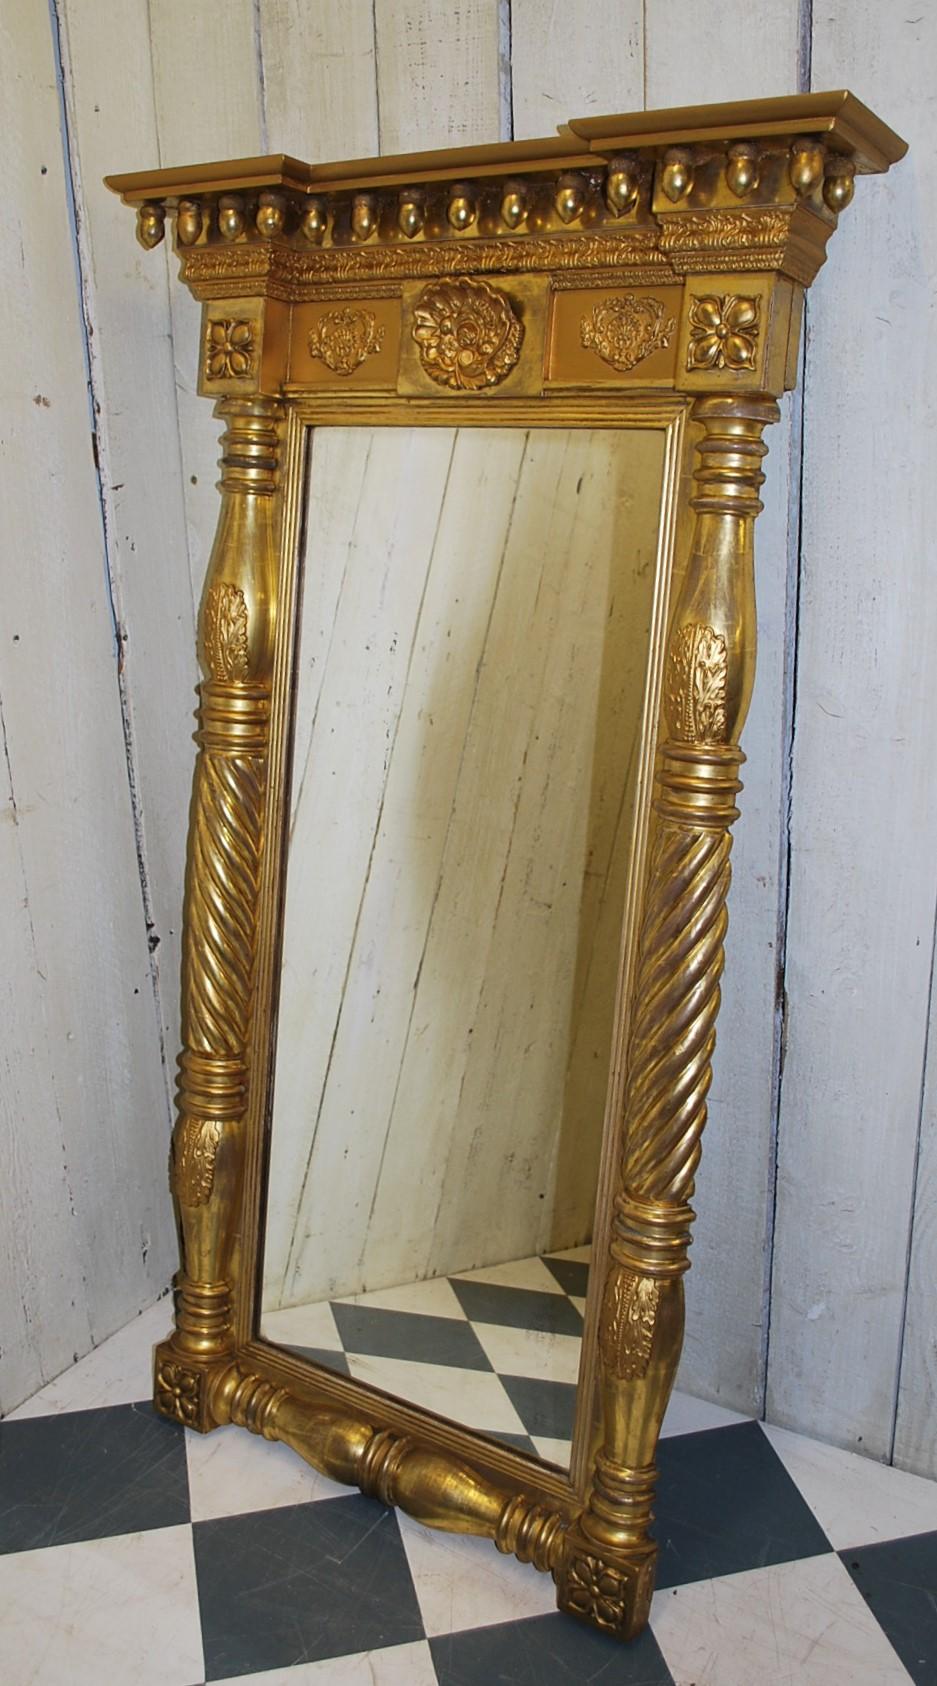 A superb quality 19th century French Pier mirror, circa 1840. Finely gilded in genuine water gilt with a beautiful surface and contrasting oil gilt decoration. Original looking glass plate with some small imperfections expected with time. Decoration